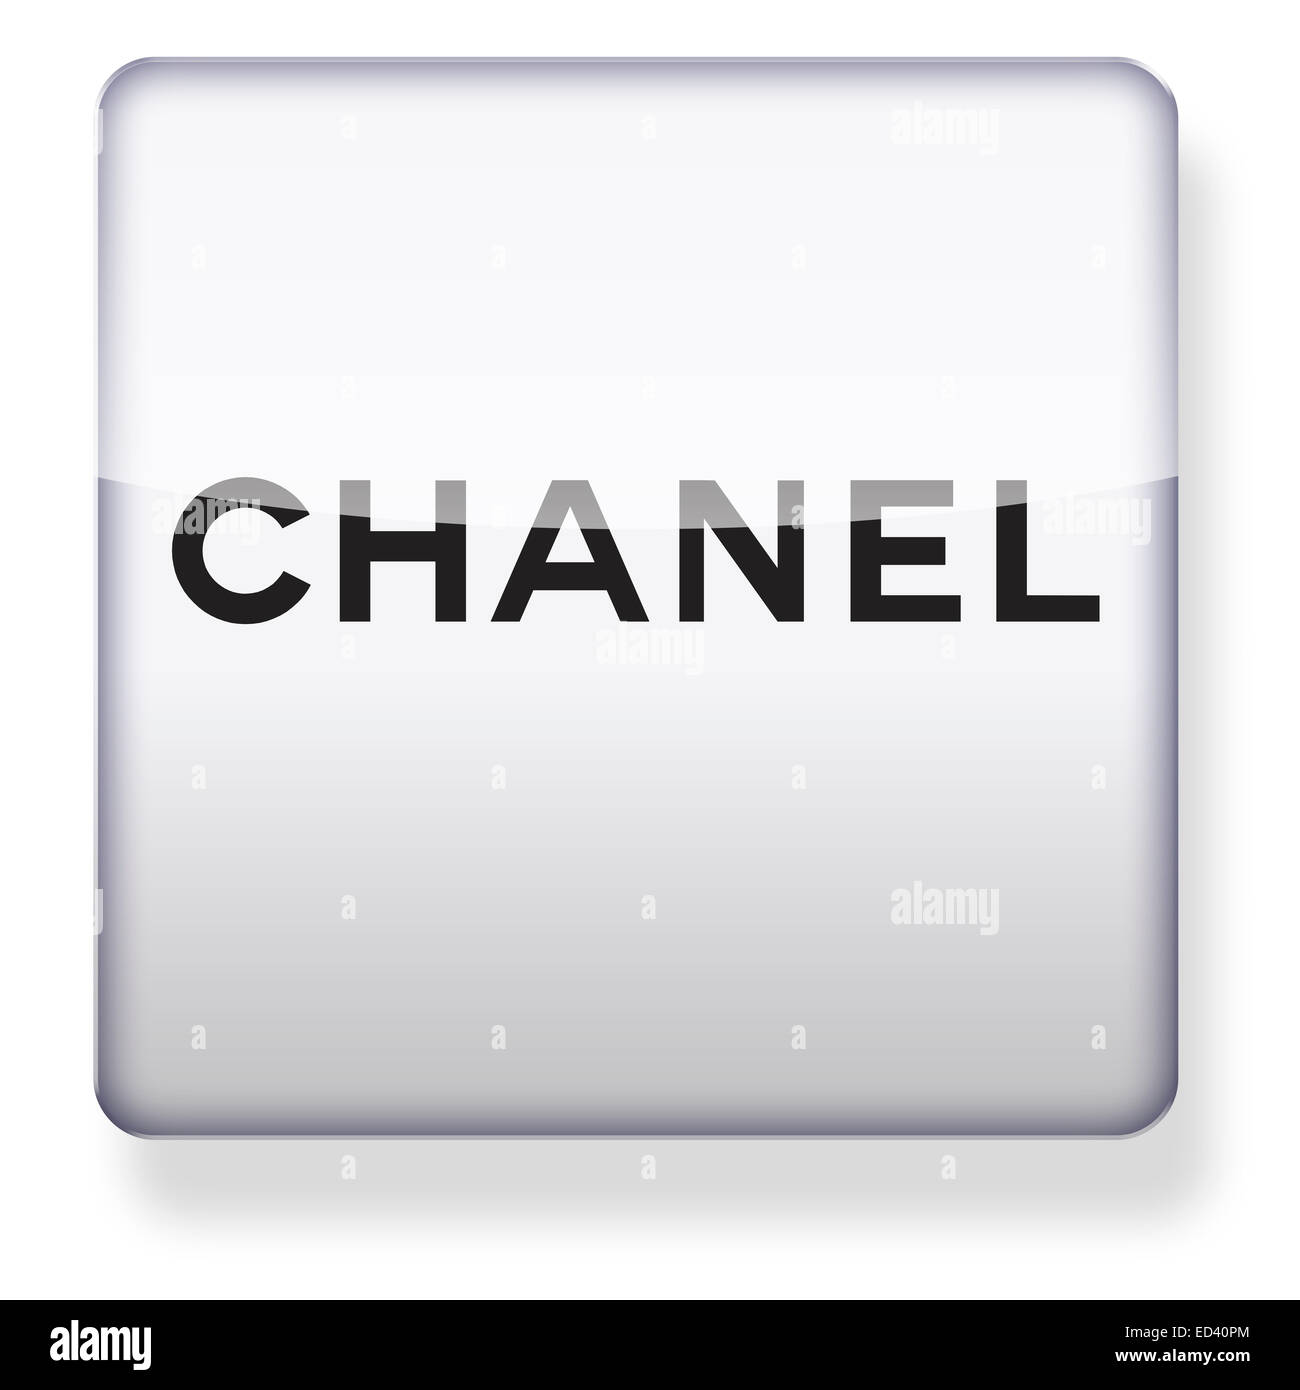 PHOTOGRAPH OF THE CHANEL LOGO - BLACK AND WHITE - quality glossy A4 print